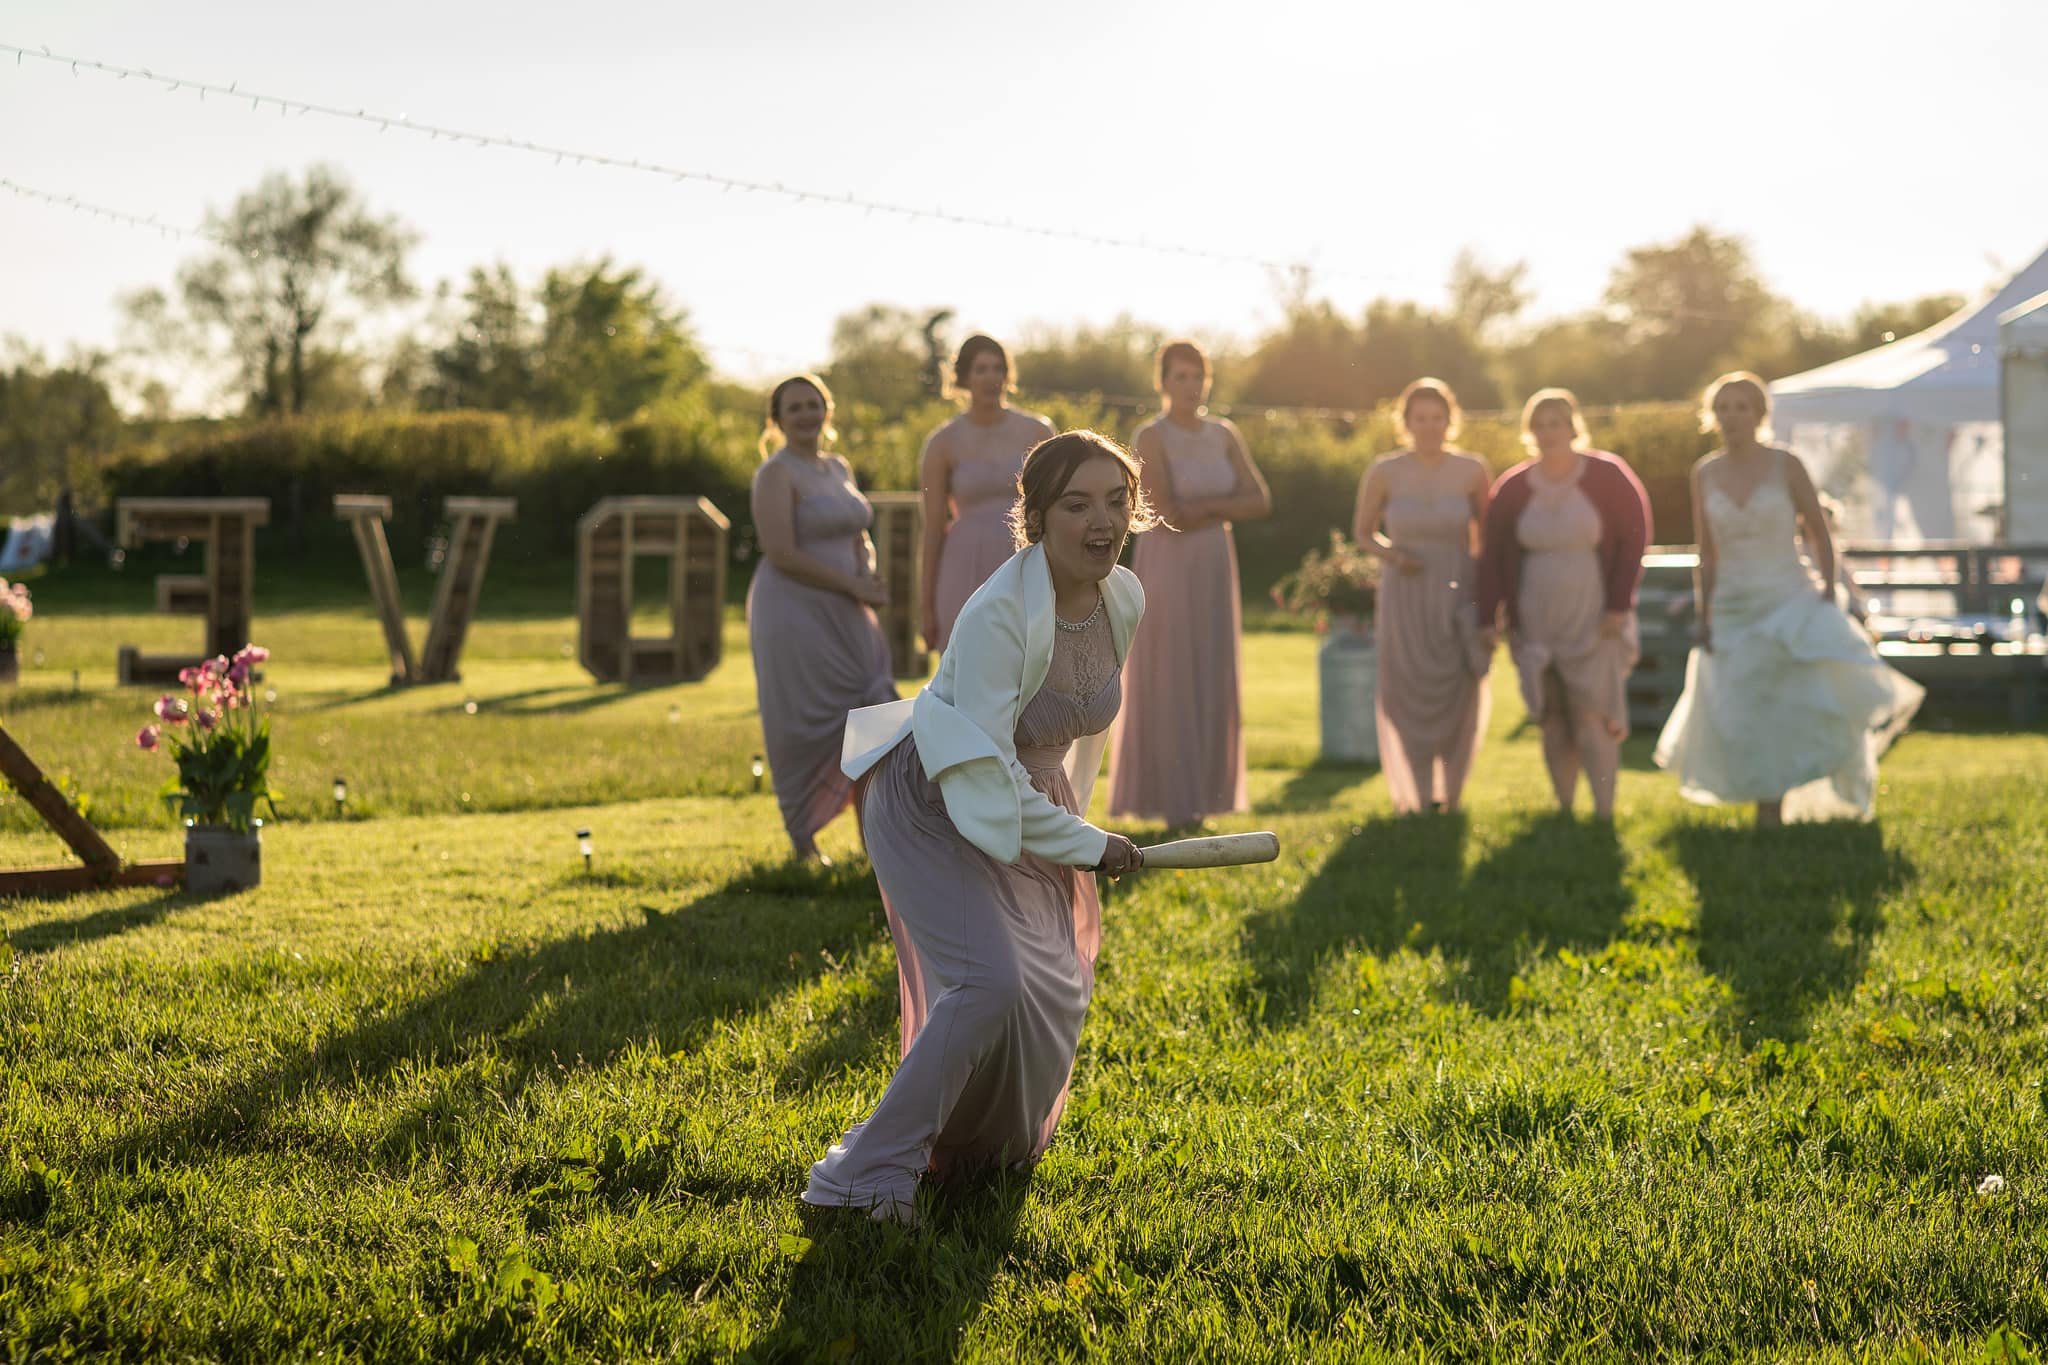 Rounders game played at sunset wedding